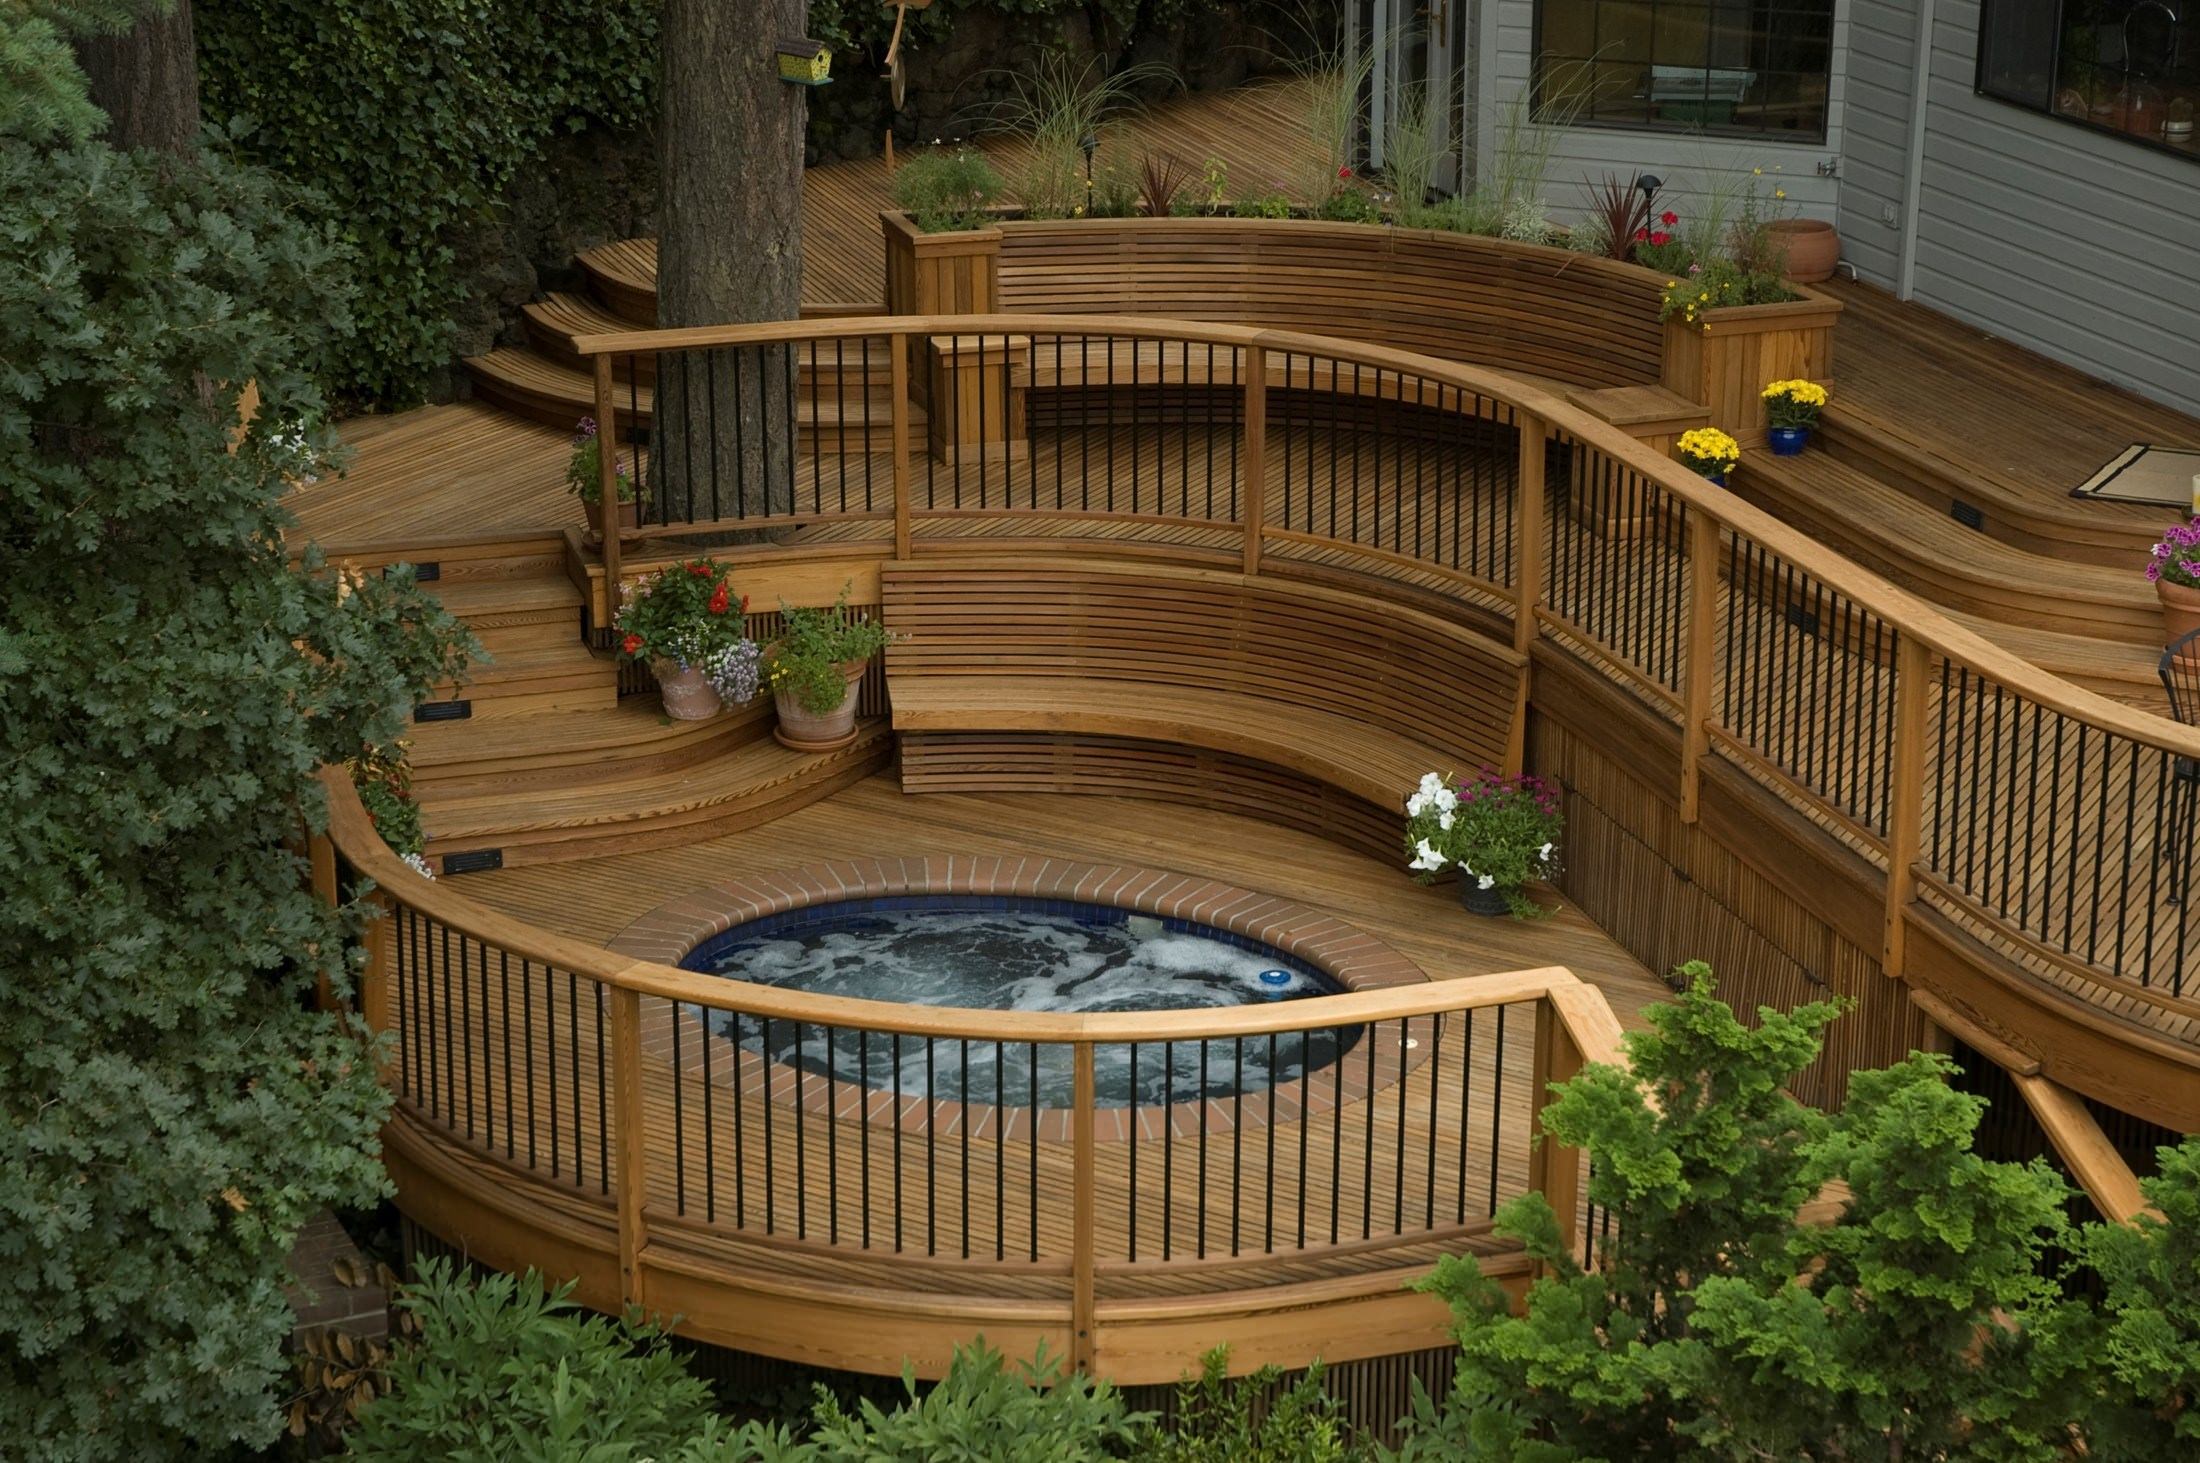 Floating decks are freestanding decks which can be located anyplace